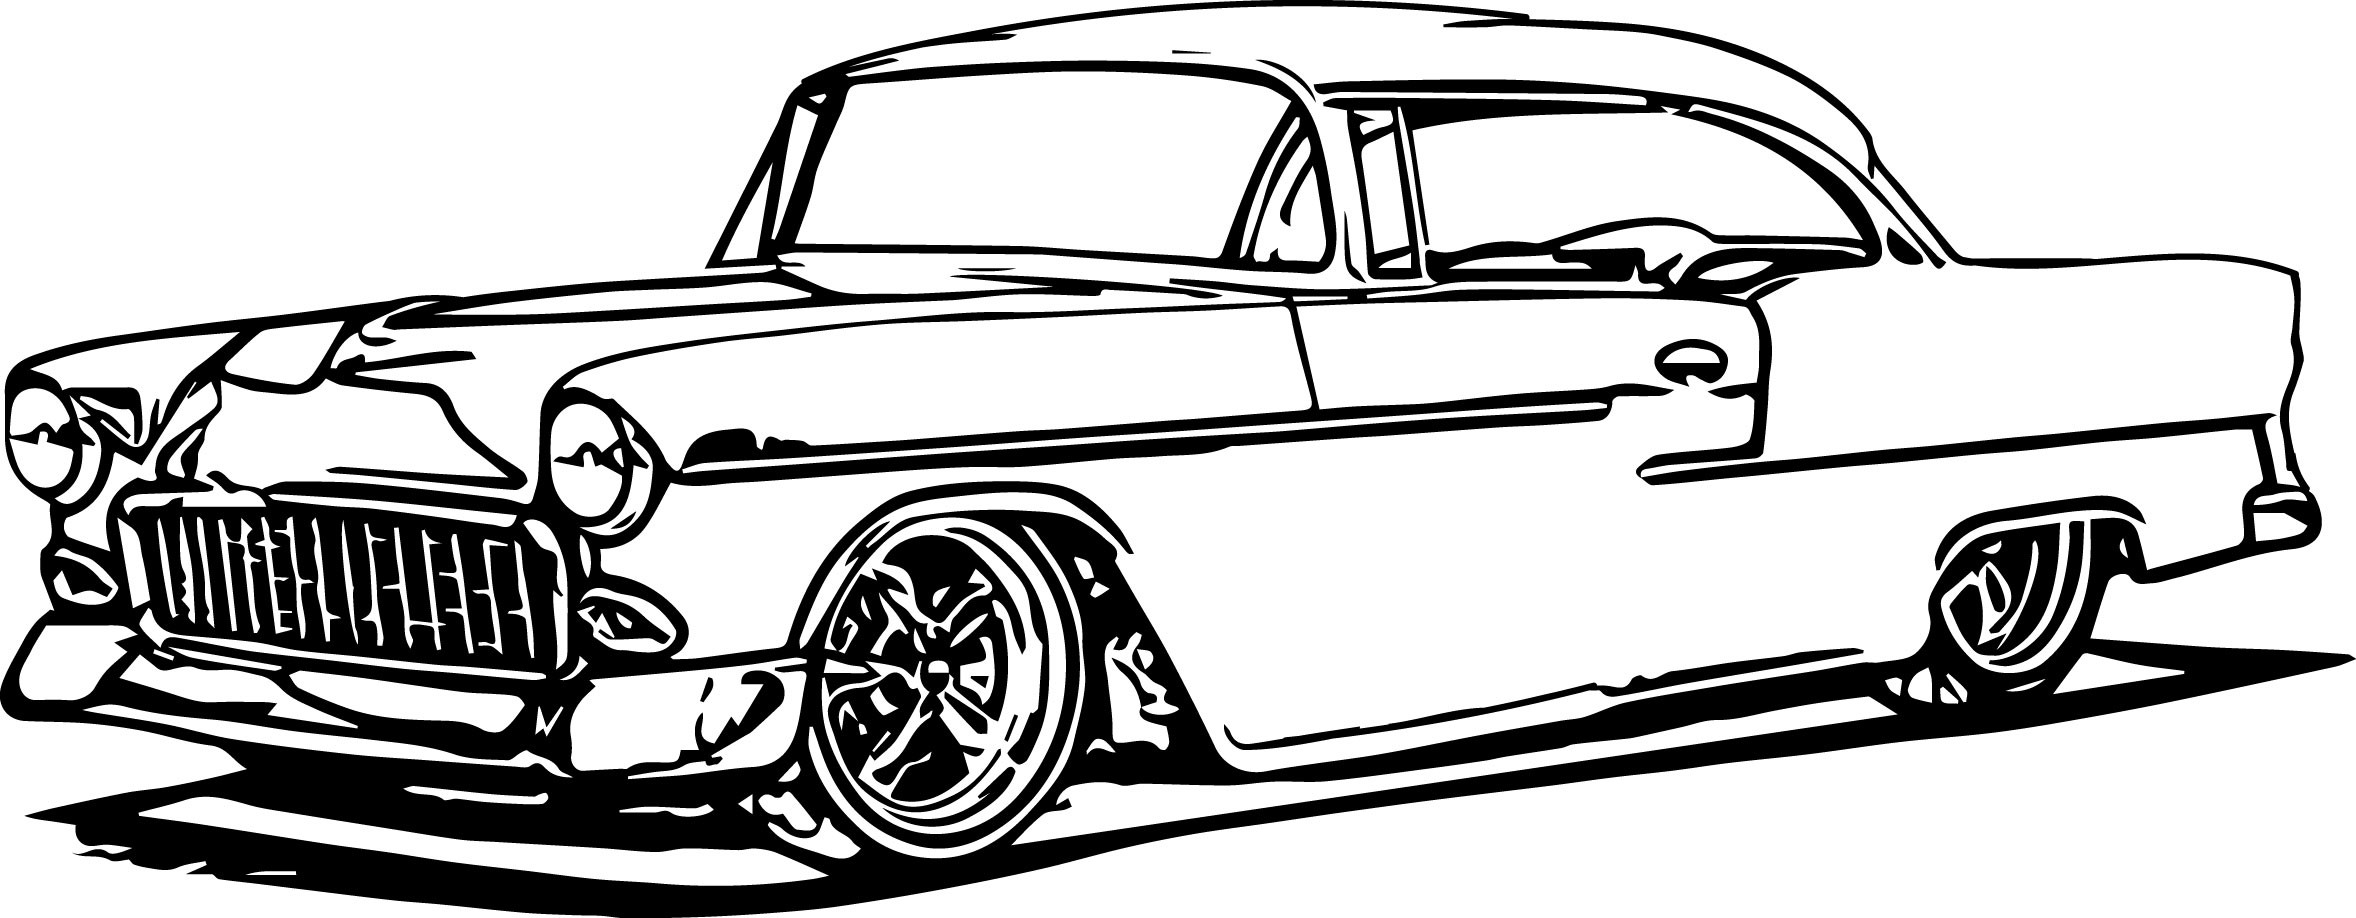 Classic Car Coloring Pages
 Printable Coloring Pages Classic Cars Printable Pages